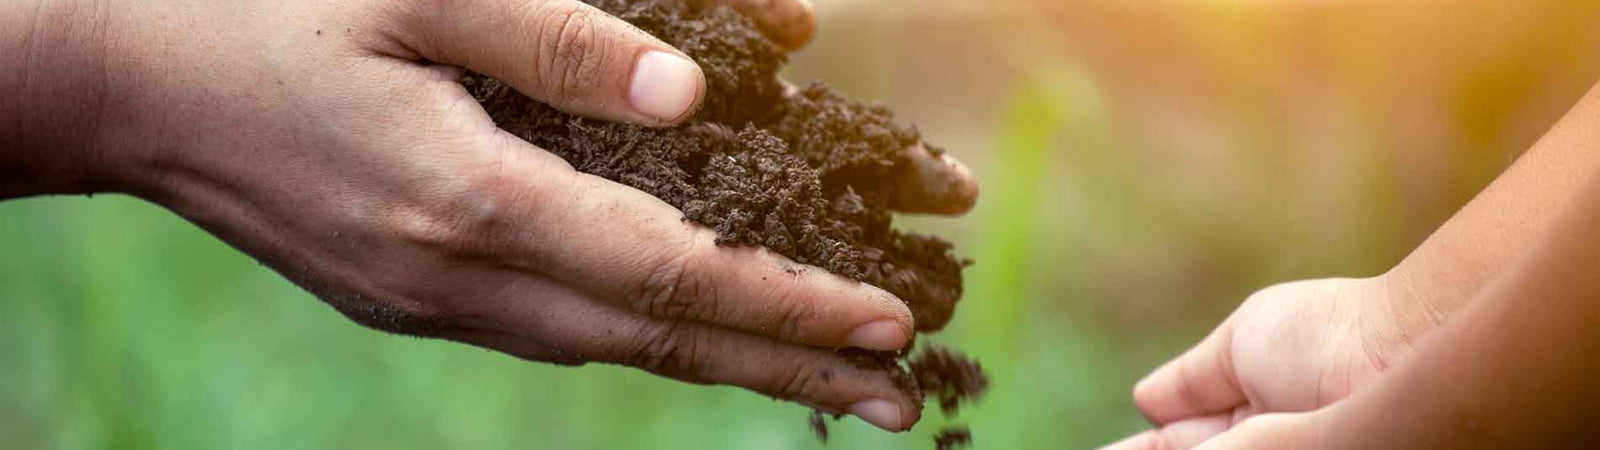 If Humic Acid is in the Soil, Why Do We Need to Add it?